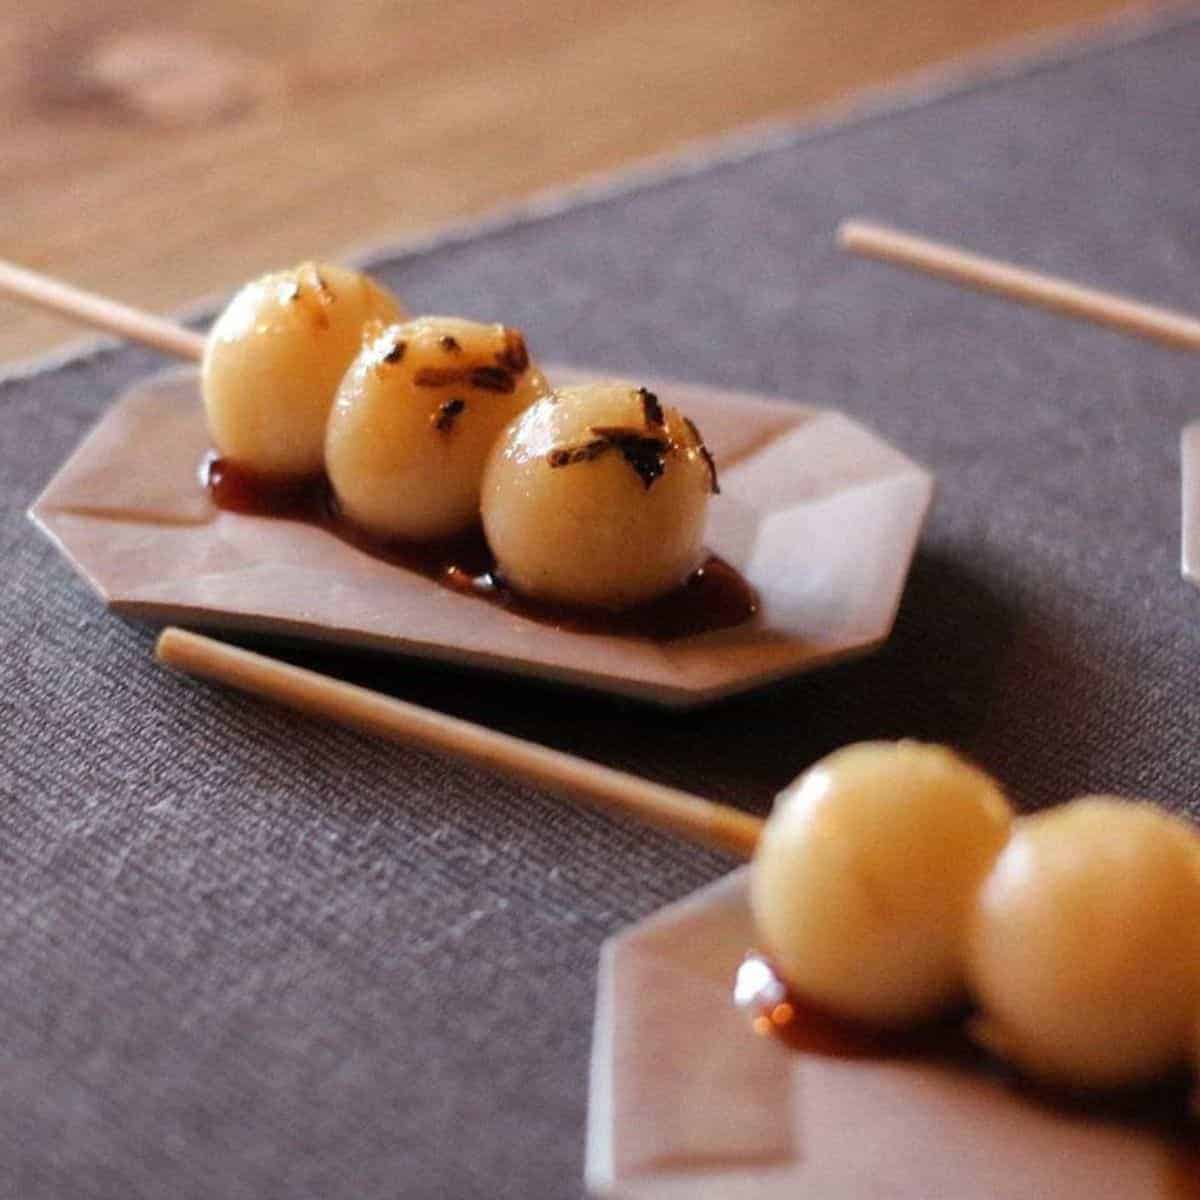 Japanese Dango that are elegantly presented in a ceramic, rectangular plate